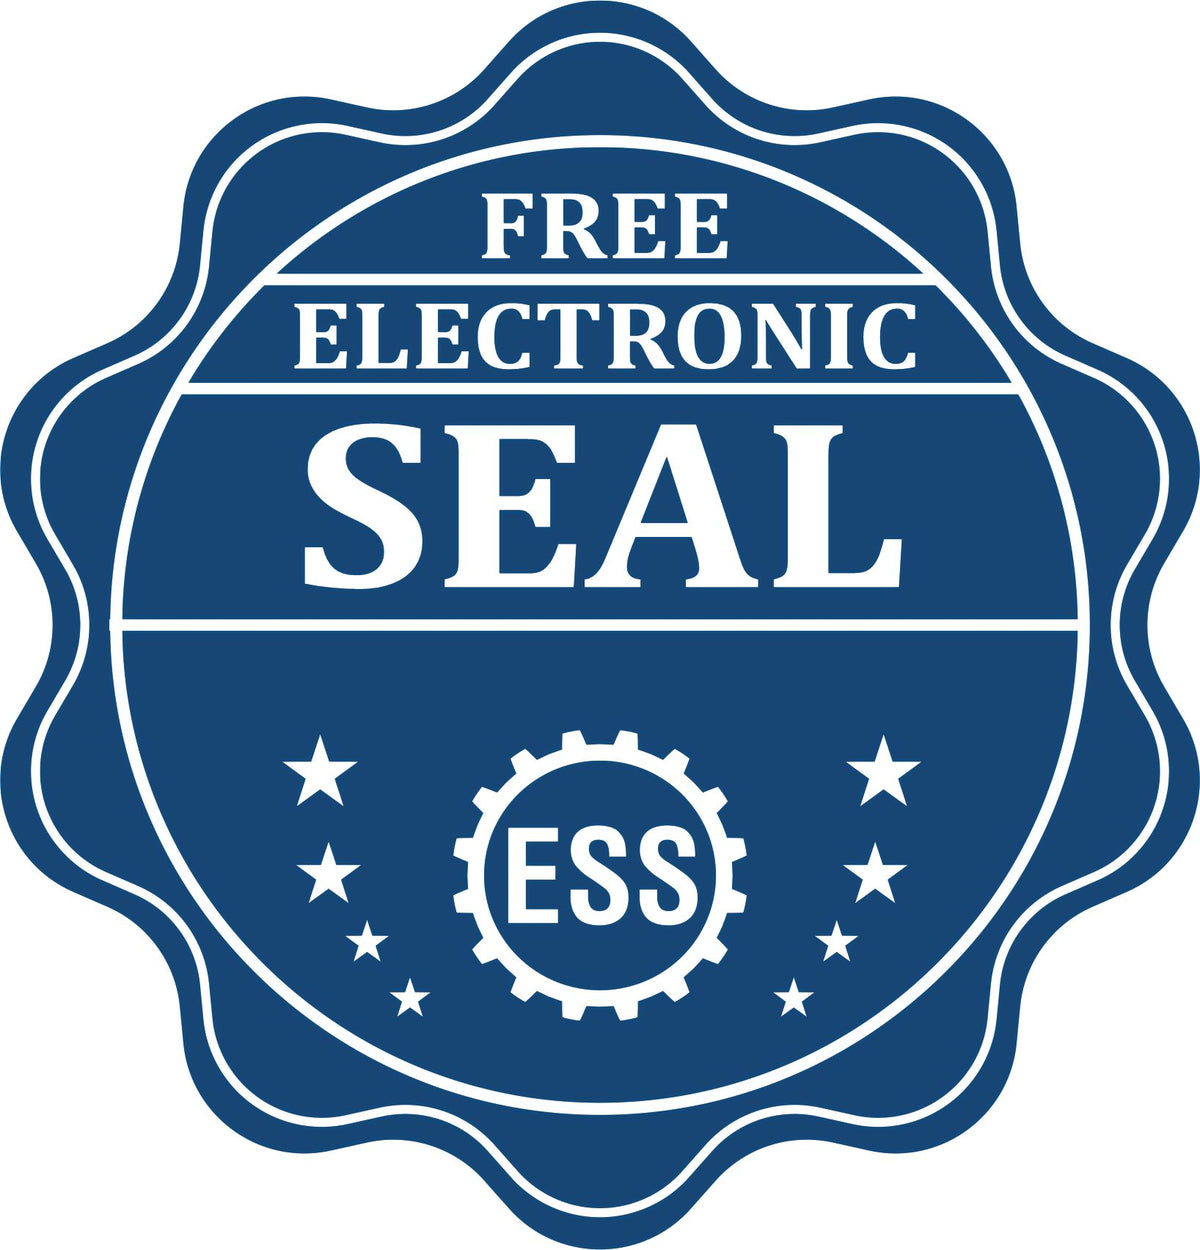 A badge showing a free electronic seal for the Hybrid Wisconsin Geologist Seal with stars and the ESS gear on the emblem.